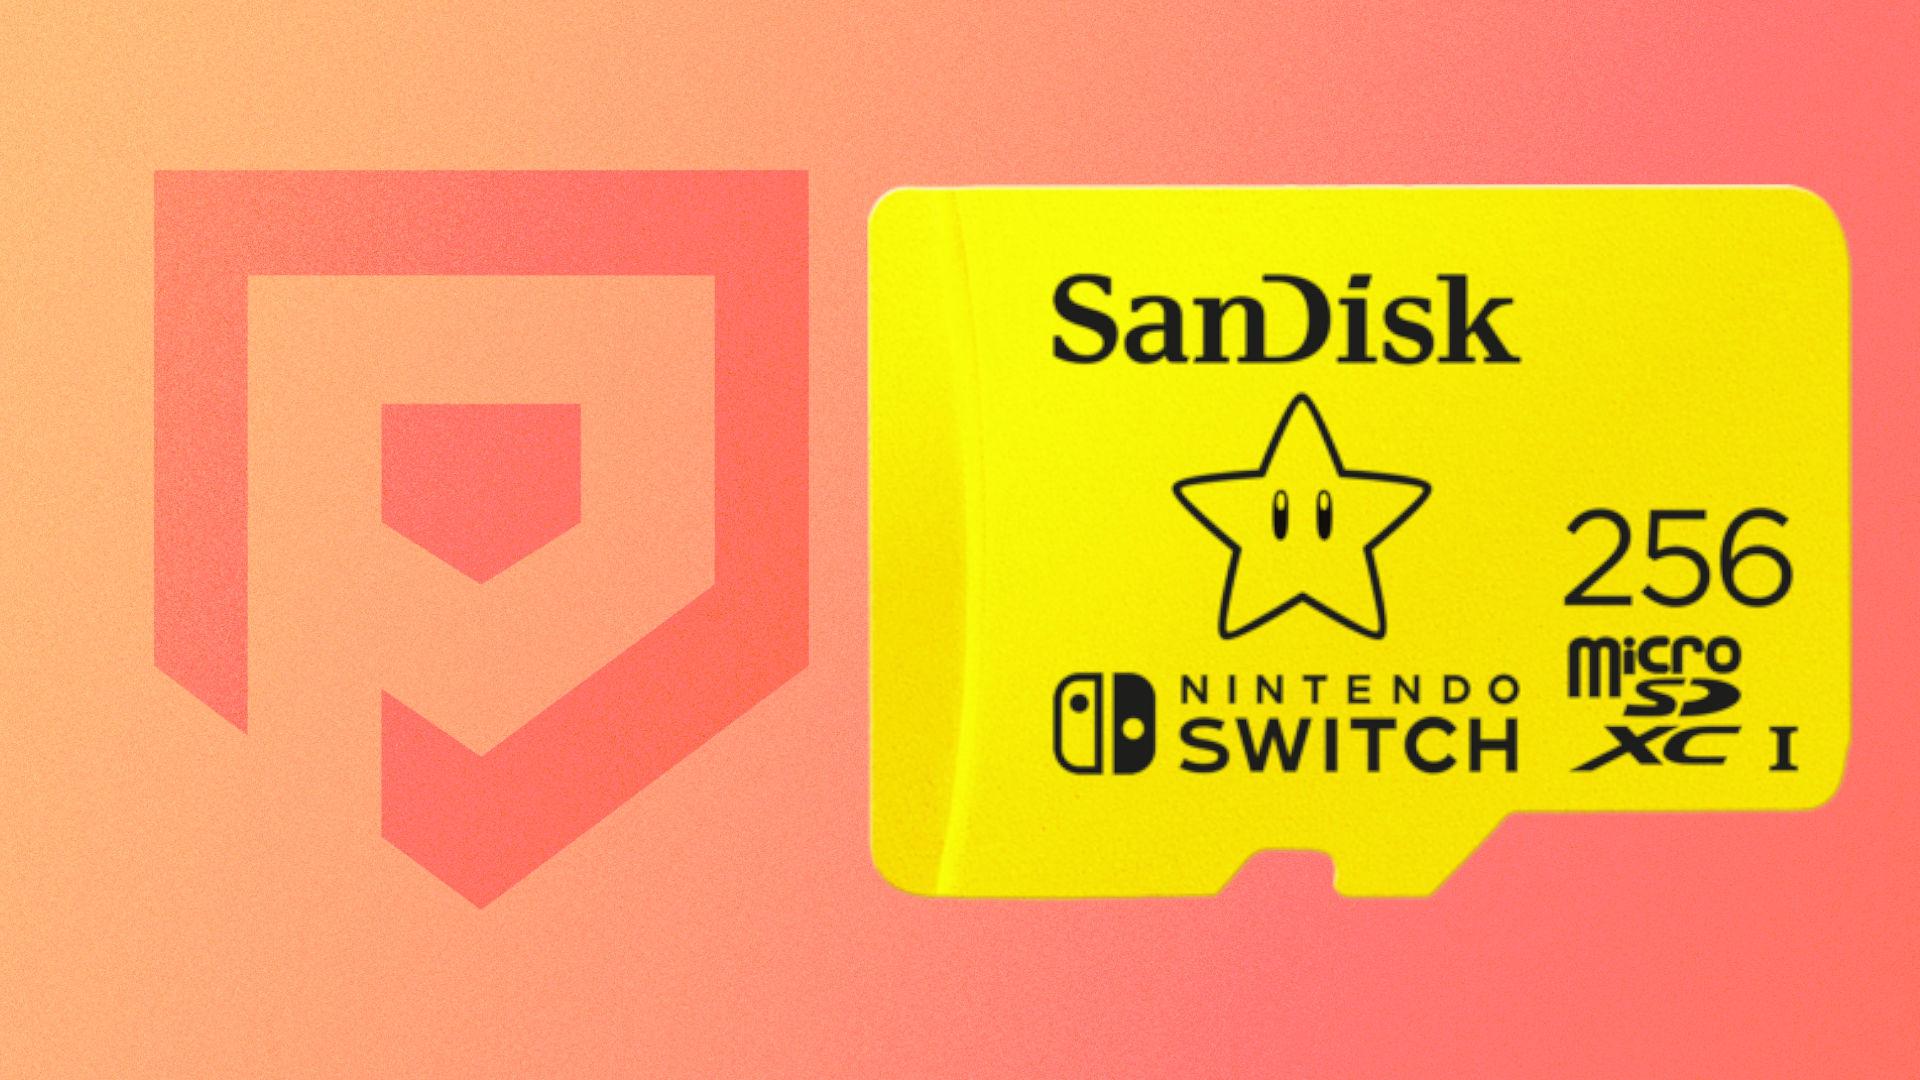 Official Nintendo Switch microSD cards are much more expensive